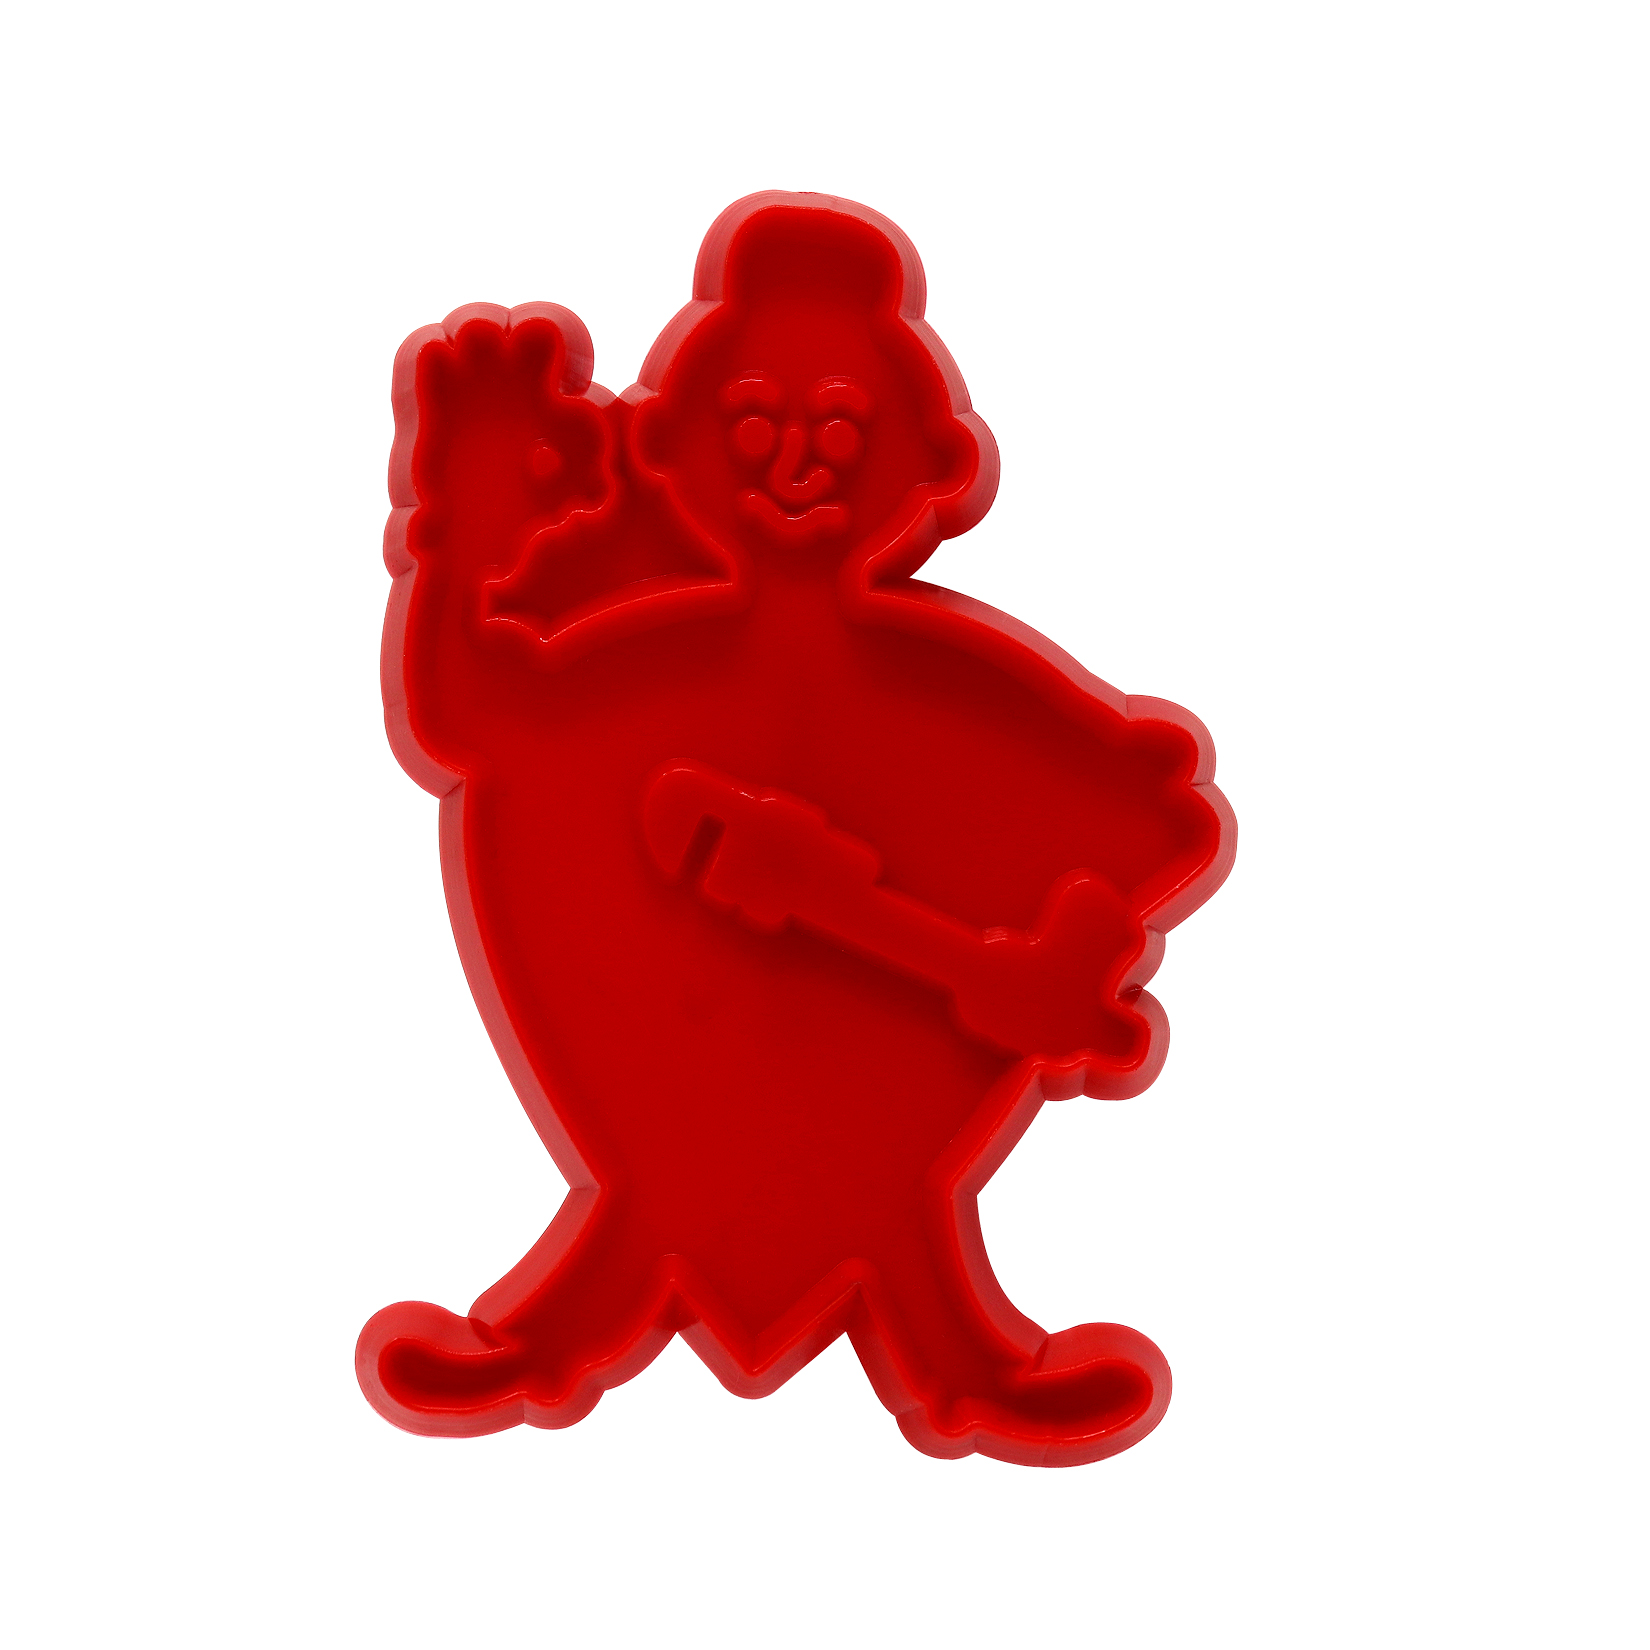 Red plumber and heart shaped cookie press